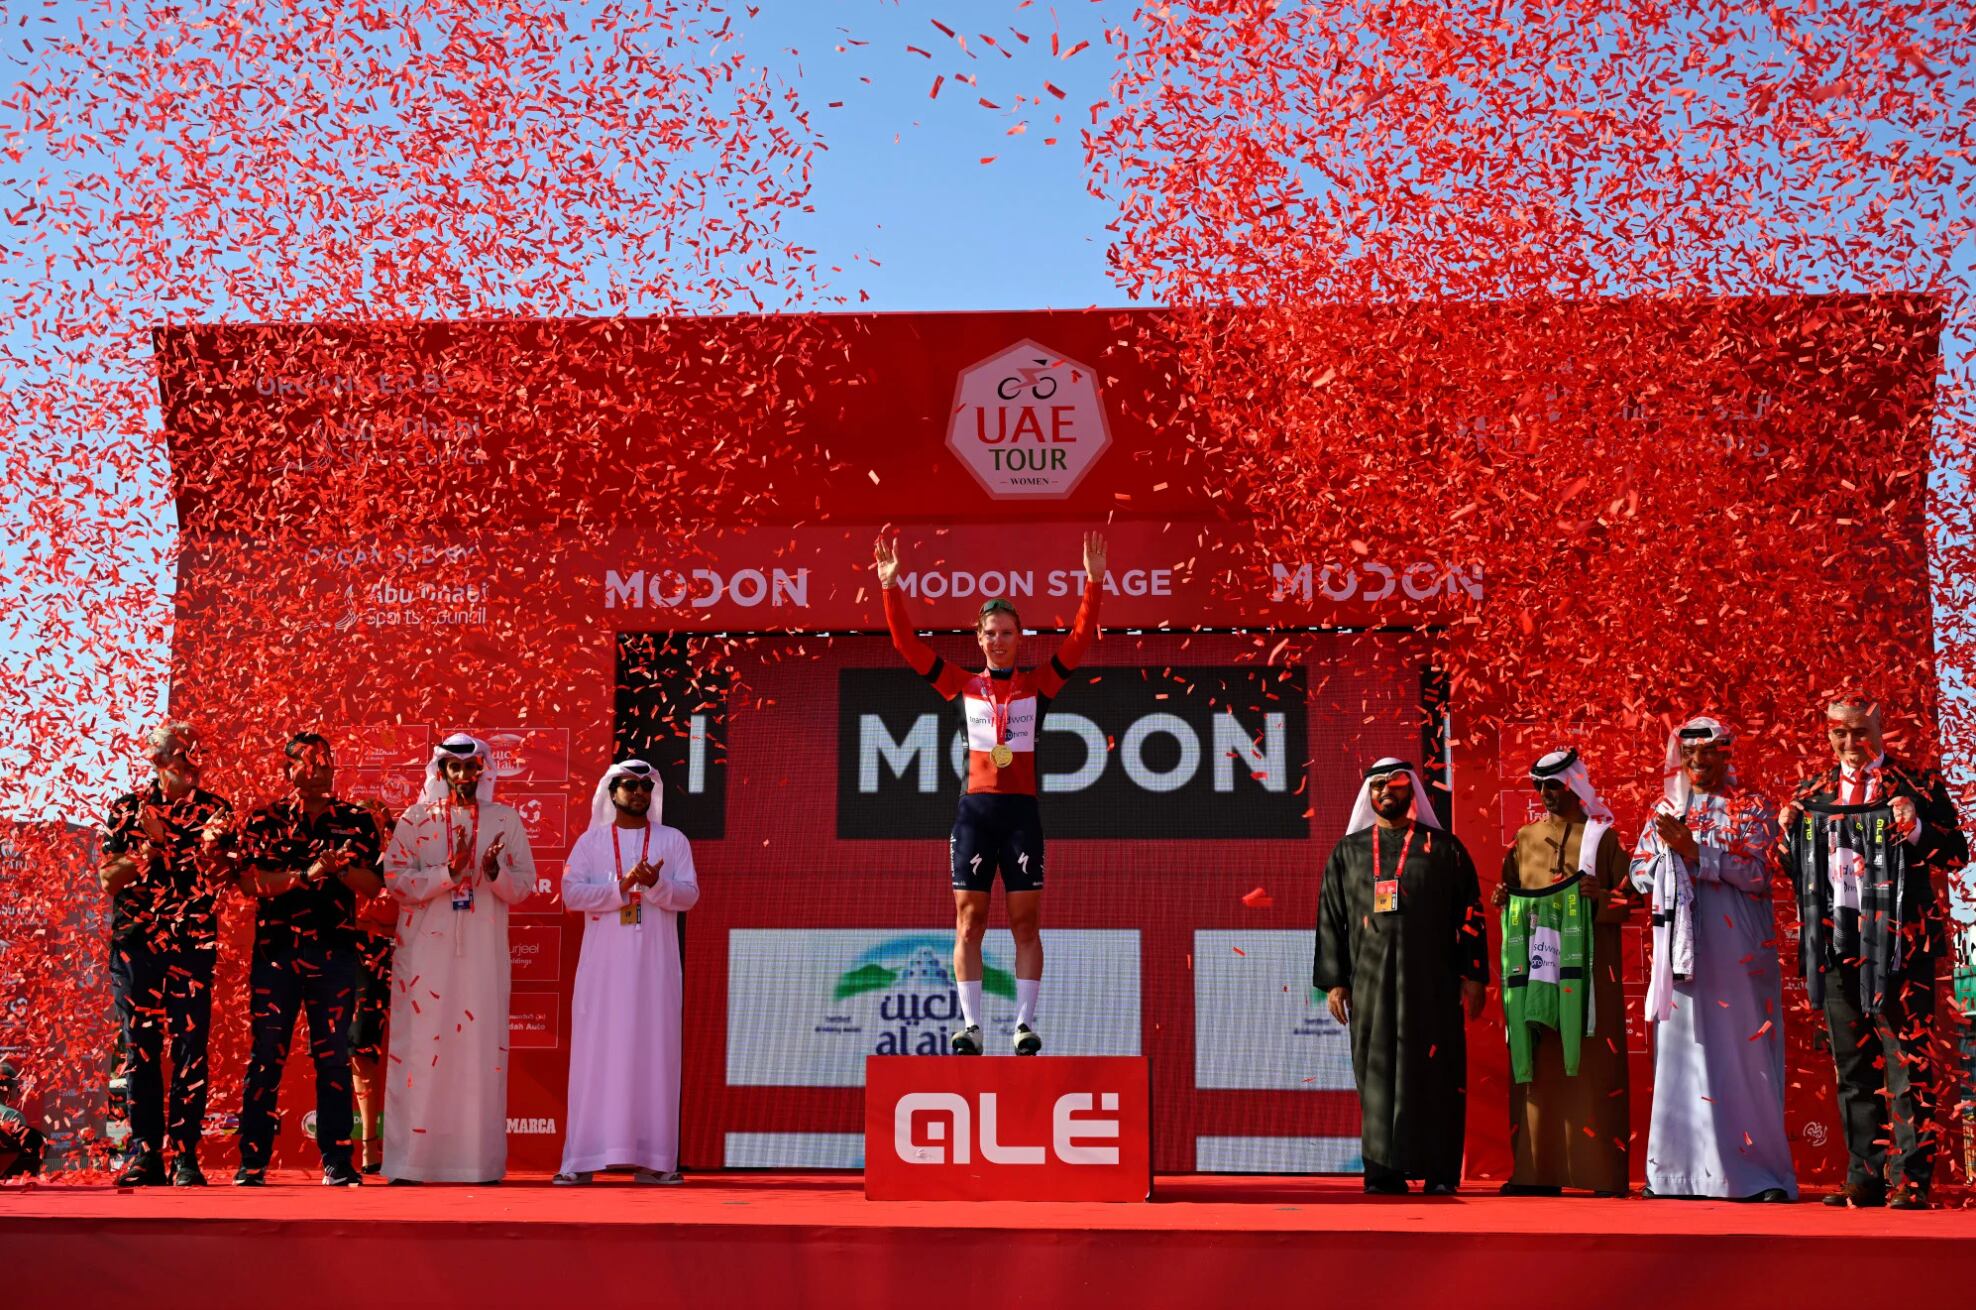 lorena wiebes seals back-to-back victories to dominate first half of uae tour